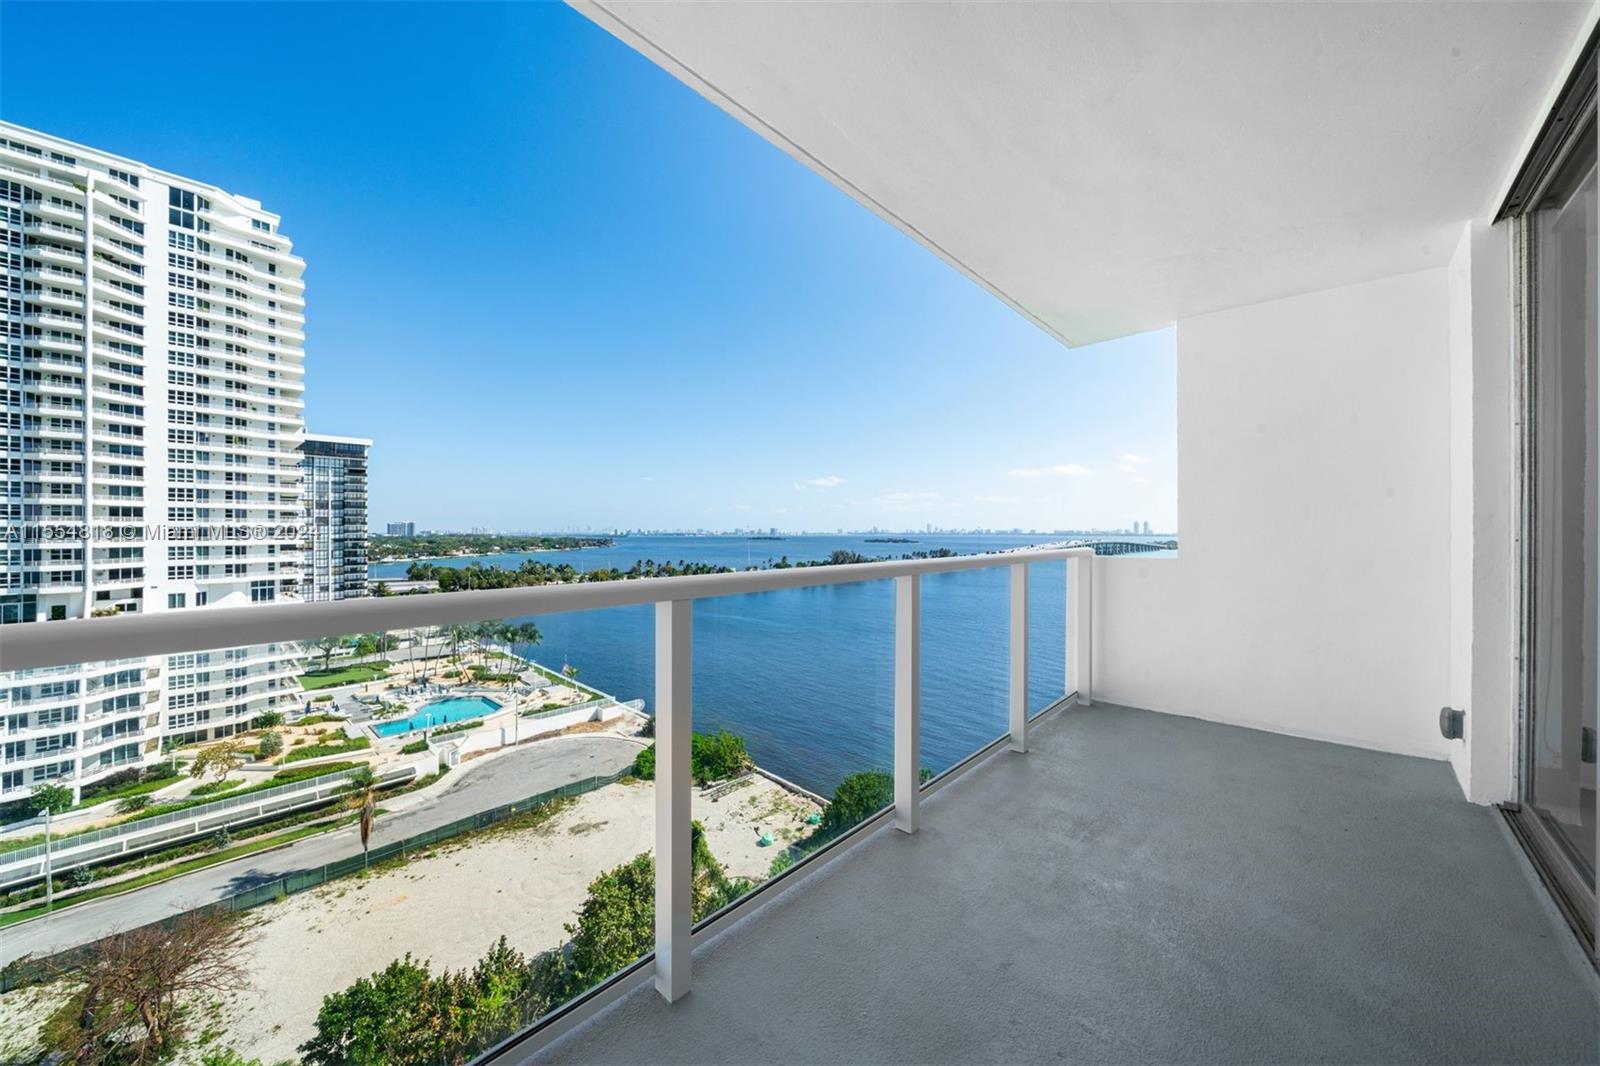 BEAUTIFULLY REMODELED WATERFRONT STUDIO WITH BREATHTAKING VIEWS OF BISCAYNE BAY IN THE HEART OF EDGEWATER NEIGHBORHOOD IN MIAMI. WITHIN WALKING DISTANCE TO MIAMI DESIGN DISTRICT, MIDTOWN, WYNWOOD, ONLY A BRIDGE AWAY FROM MIAMI BEACH, AND CONVENIENTLY LOCATED WITHIN THREE BLOCKS OF THE HIGHWAY ACCESS. UPDATED WITH STAINLESS STEEL APPLIANCES, KITCHEN WITH ITALIAN CARRARA QUARTZ COUNTER TOP AND EURO CABINETS, REMODELED BATHROOM, SPACIOUS BALCONY WITH BAY VIEWS. AMENITIES INCLUDE A HEATED POOL, PRIVATE DOG PARK, GYM, MANAGEMENT ON SITE, BEACH CABANA, DOCK, BBQ AREA, LOUNGE/GAME ROOM, TENNIS COURT. ONE ASSIGNED PARKING SPACE.